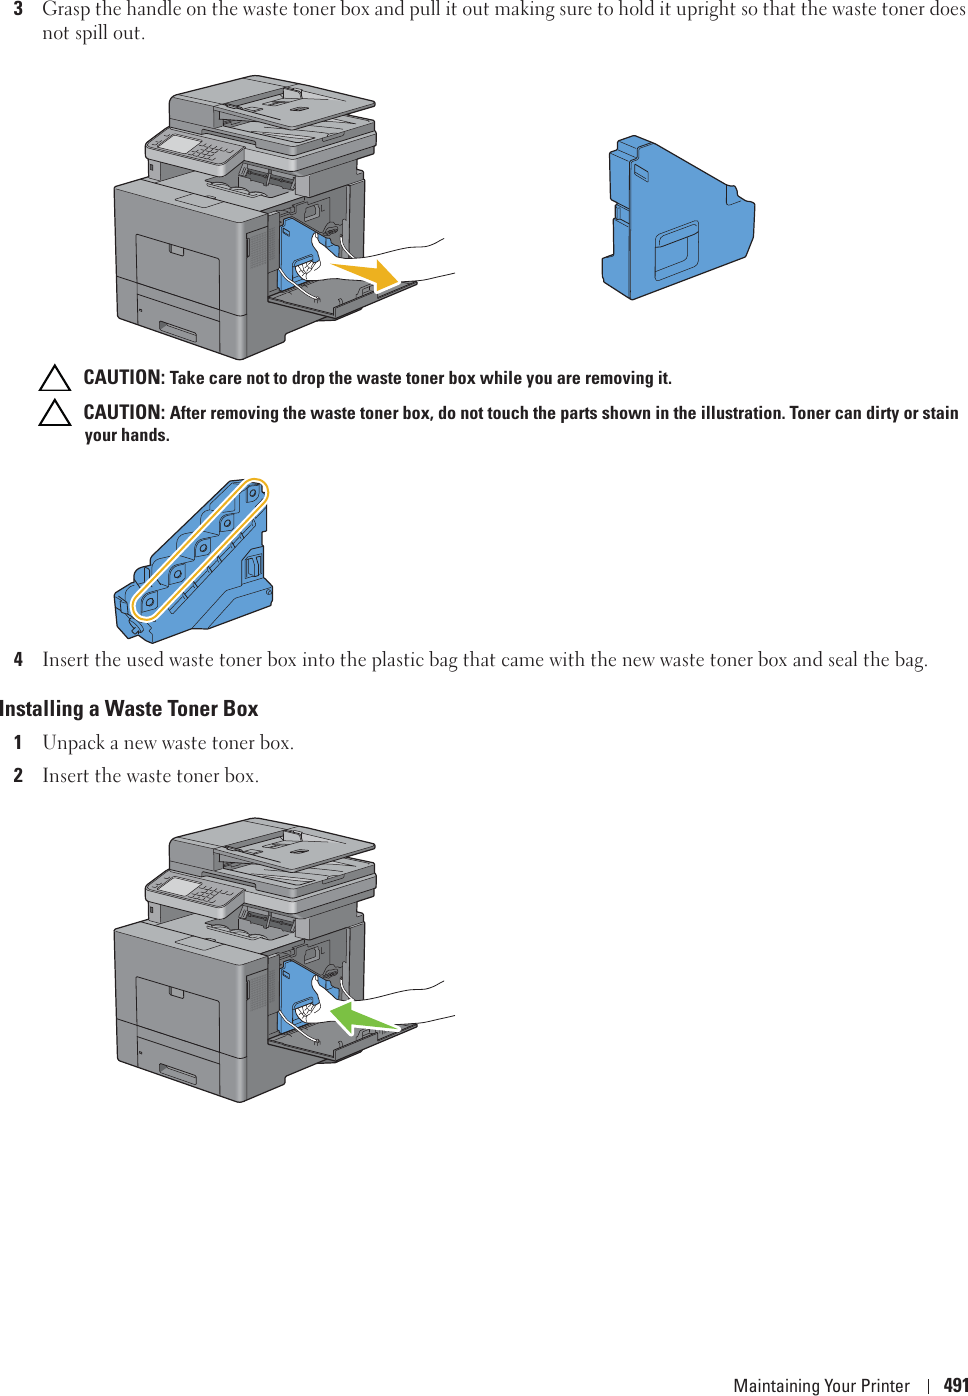 Maintaining Your Printer 4913Grasp the handle on the waste toner box and pull it out making sure to hold it upright so that the waste toner does not spill out. CAUTION: Take care not to drop the waste toner box while you are removing it. CAUTION: After removing the waste toner box, do not touch the parts shown in the illustration. Toner can dirty or stain your hands.4Insert the used waste toner box into the plastic bag that came with the new waste toner box and seal the bag.Installing a Waste Toner Box1Unpack a new waste toner box.2Insert the waste toner box.